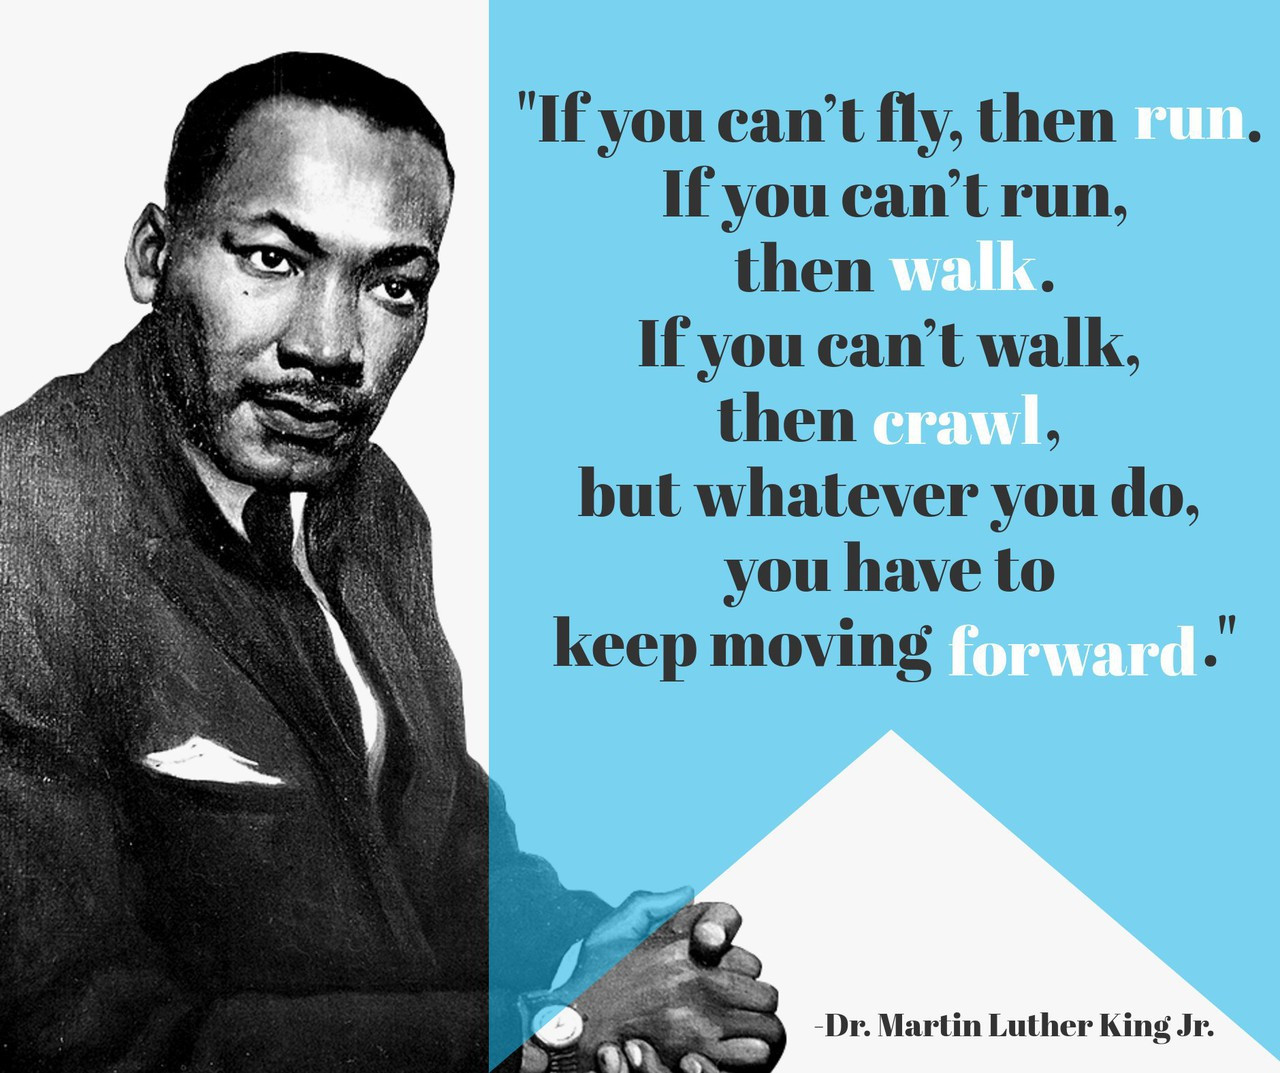 Martin Luther King Jr Quotes On Leadership
 10 Inspirational Leadership Quotes by Martin Luther King Jr